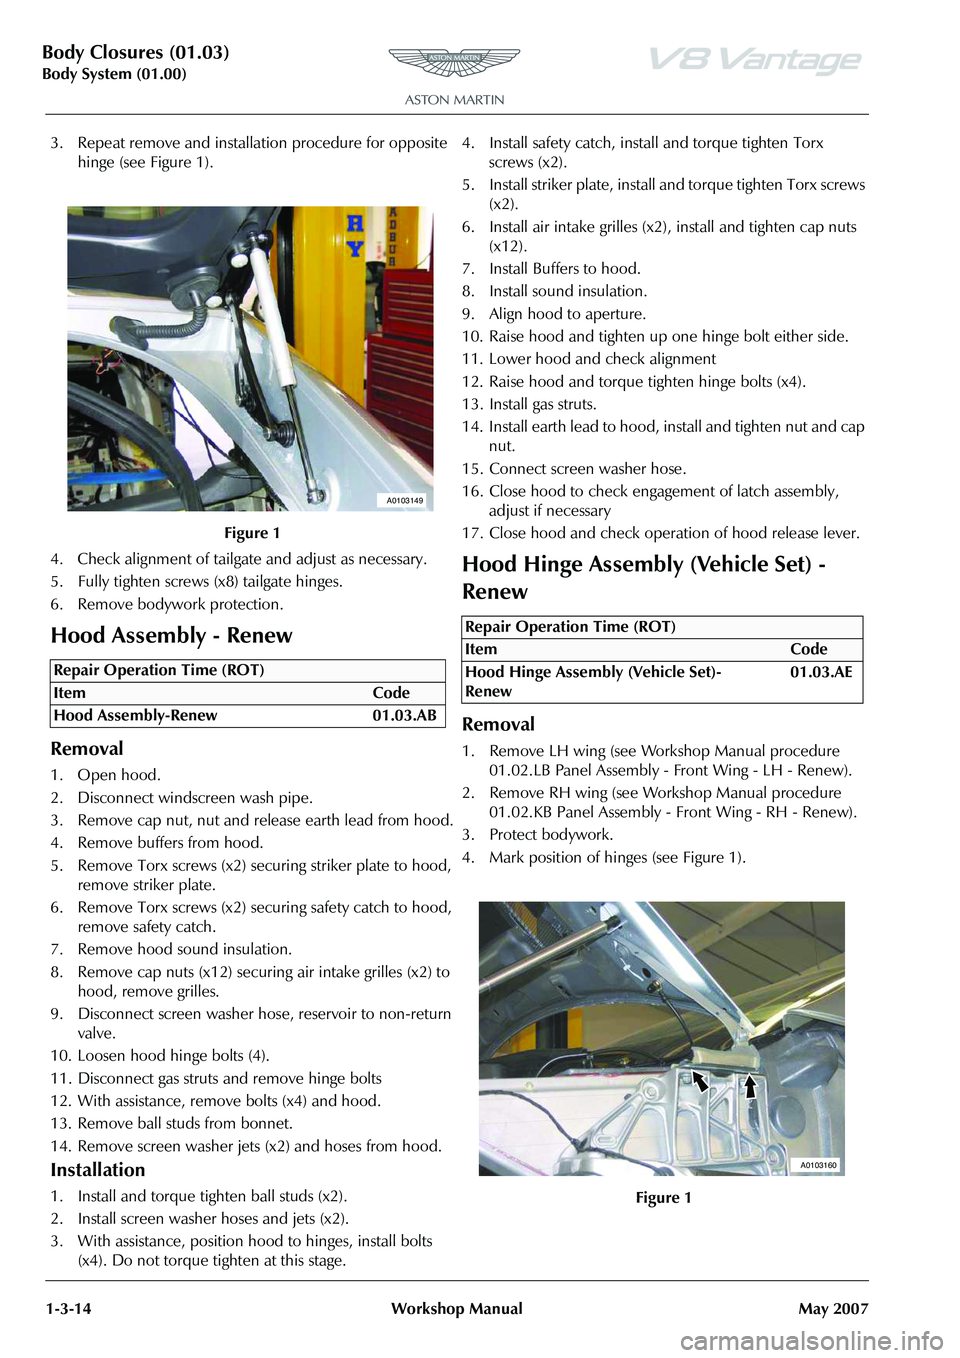 ASTON MARTIN V8 VANTAGE 2010  Workshop Manual Body Closures (01.03)
Body System (01.00)1-3-14 Workshop Manual May 2007
3. Repeat remove and installa tion procedure for opposite 
hinge (see Figure 1).
4. Check alignment of tailgate and adjust as n